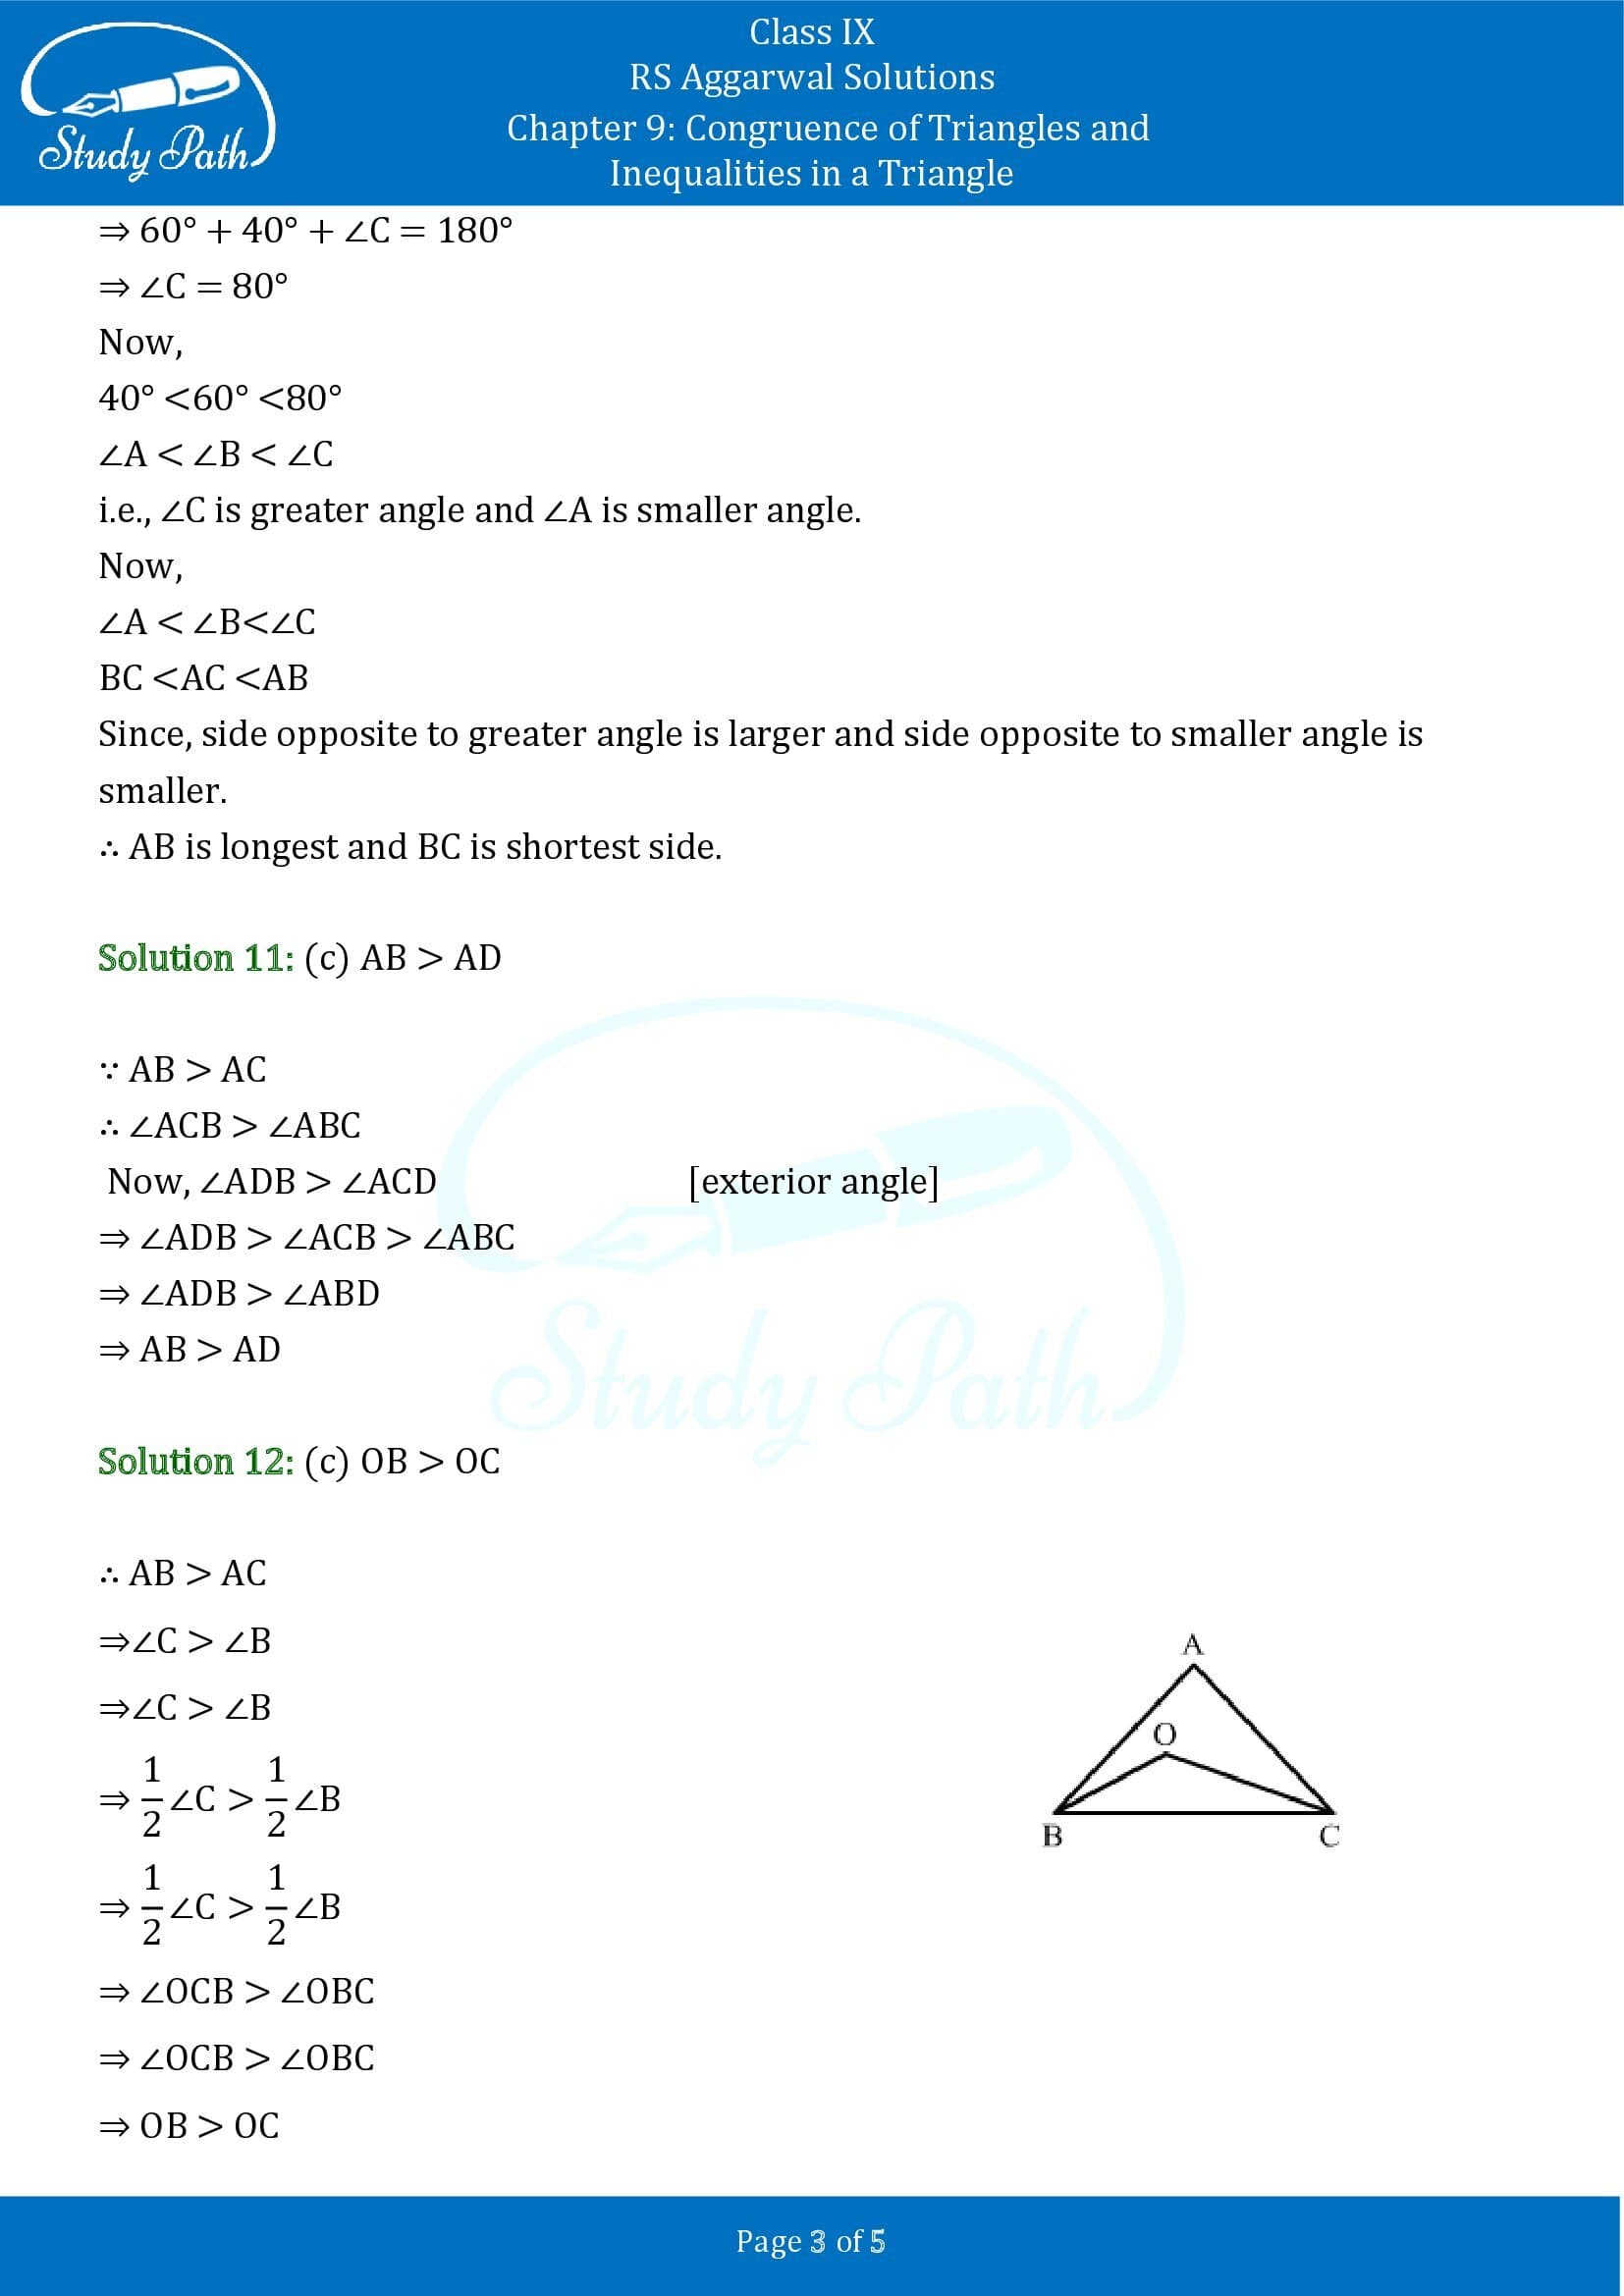 RS Aggarwal Solutions Class 9 Chapter 9 Congruence of Triangles and Inequalities in a Triangle Multiple Choice Questions MCQs 00003